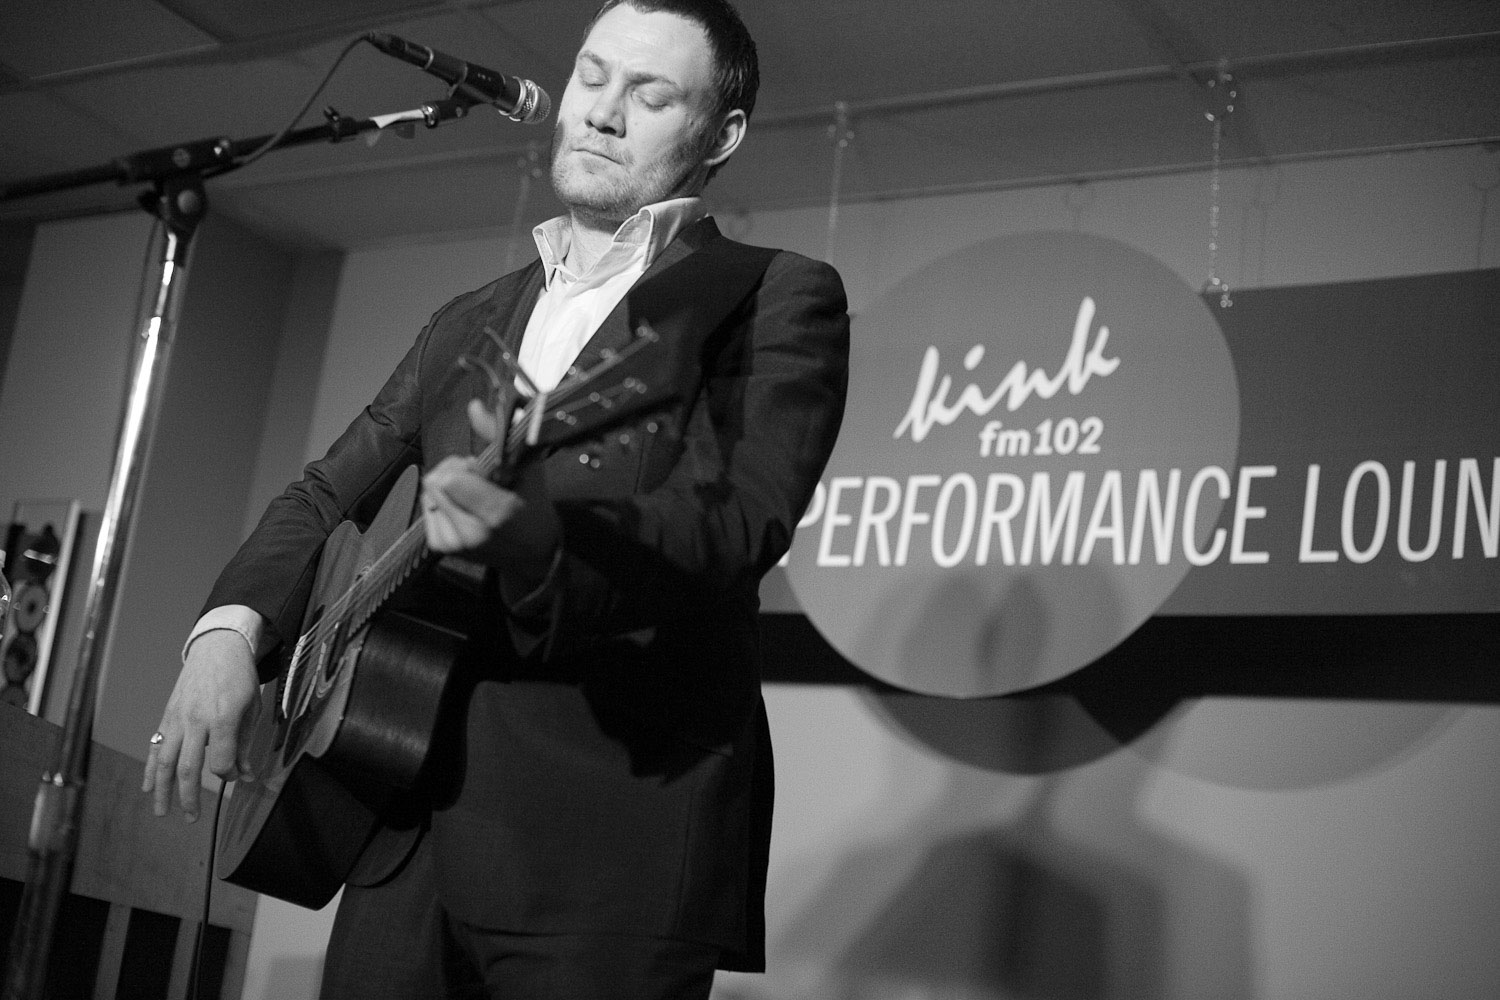 David Gray plays the guitar at the Live Performance Lounge